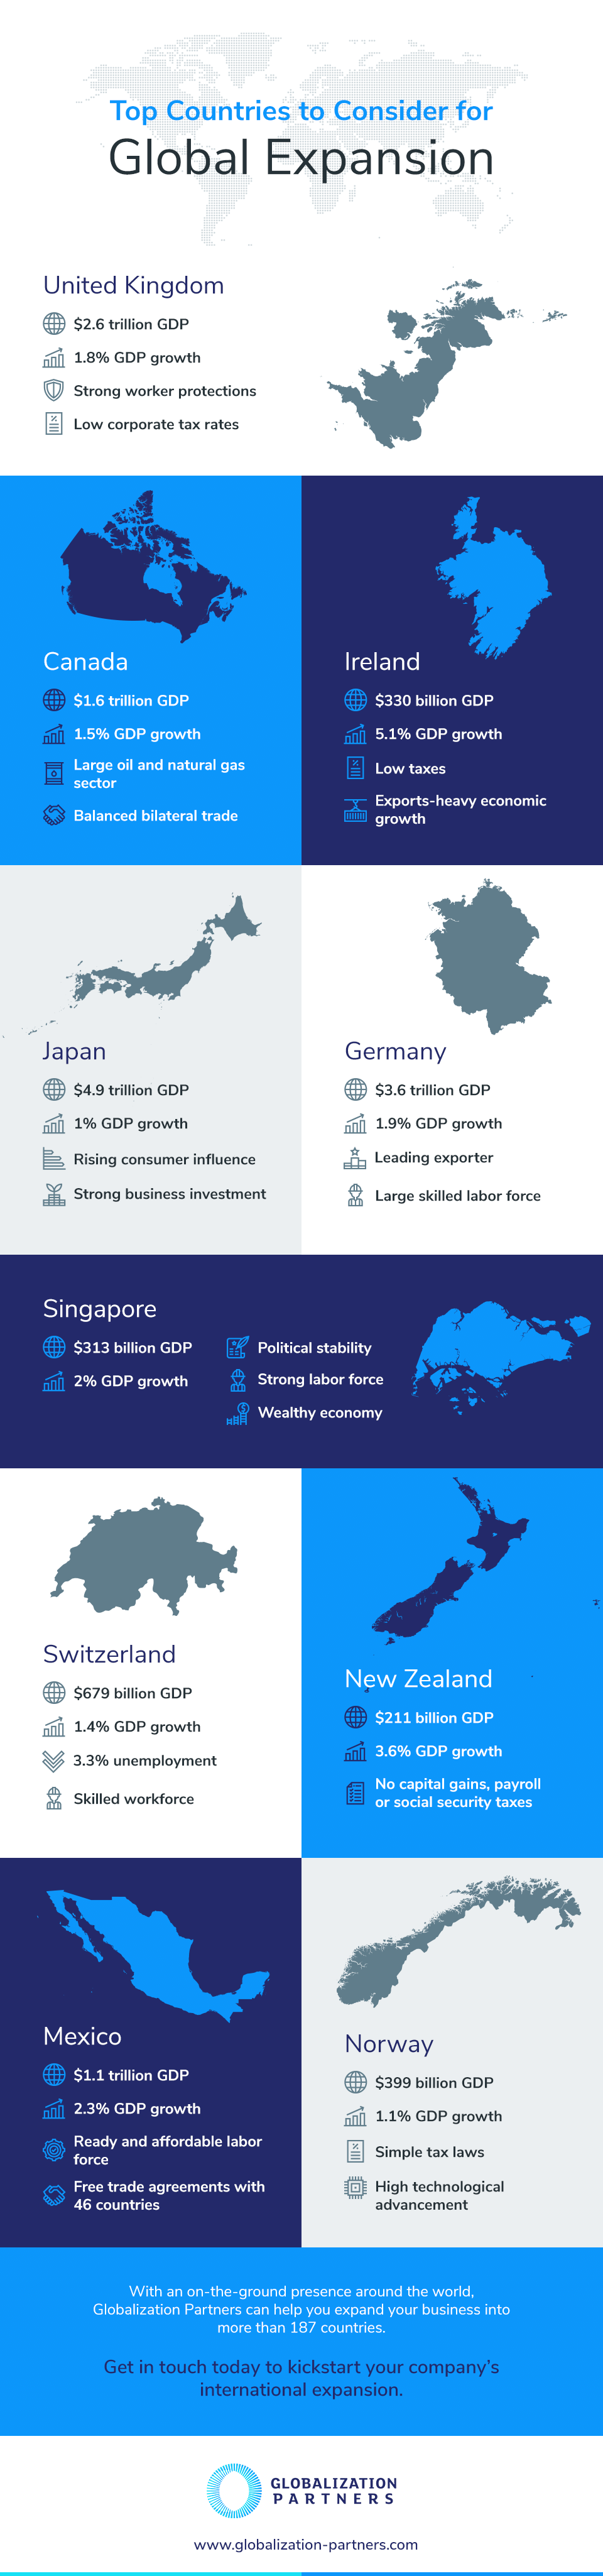 Top 10 Countries to consider for global expansion